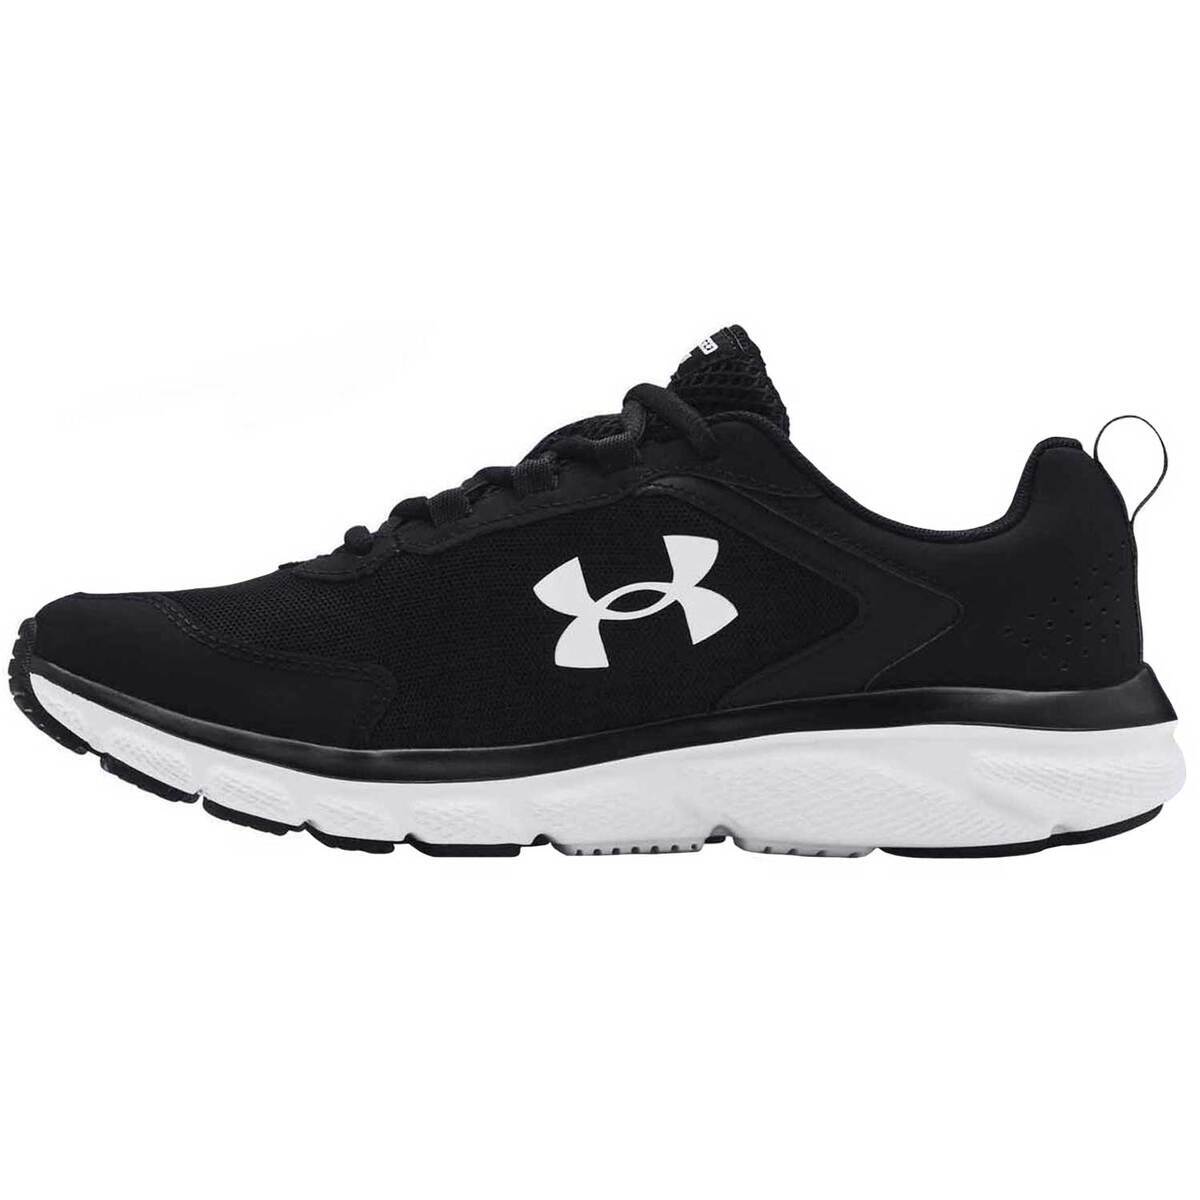 Under Armour Men's Charged Assert 9 Running Shoes | Sportsman's Warehouse